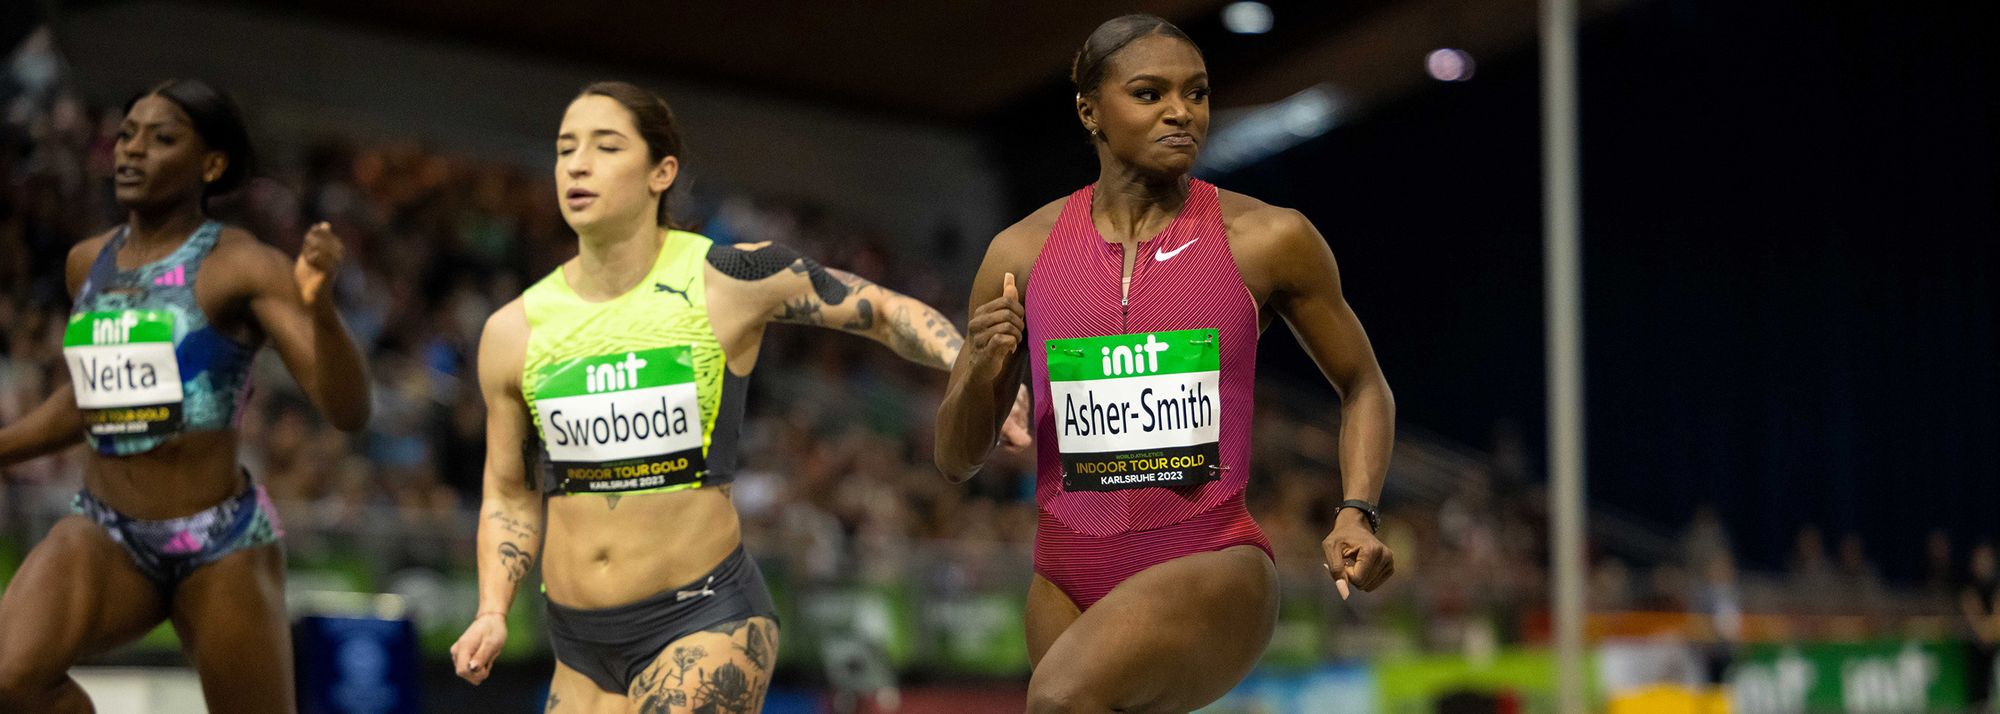 Asher-Smith equals long-standing meeting record and breaks British best with 7.04